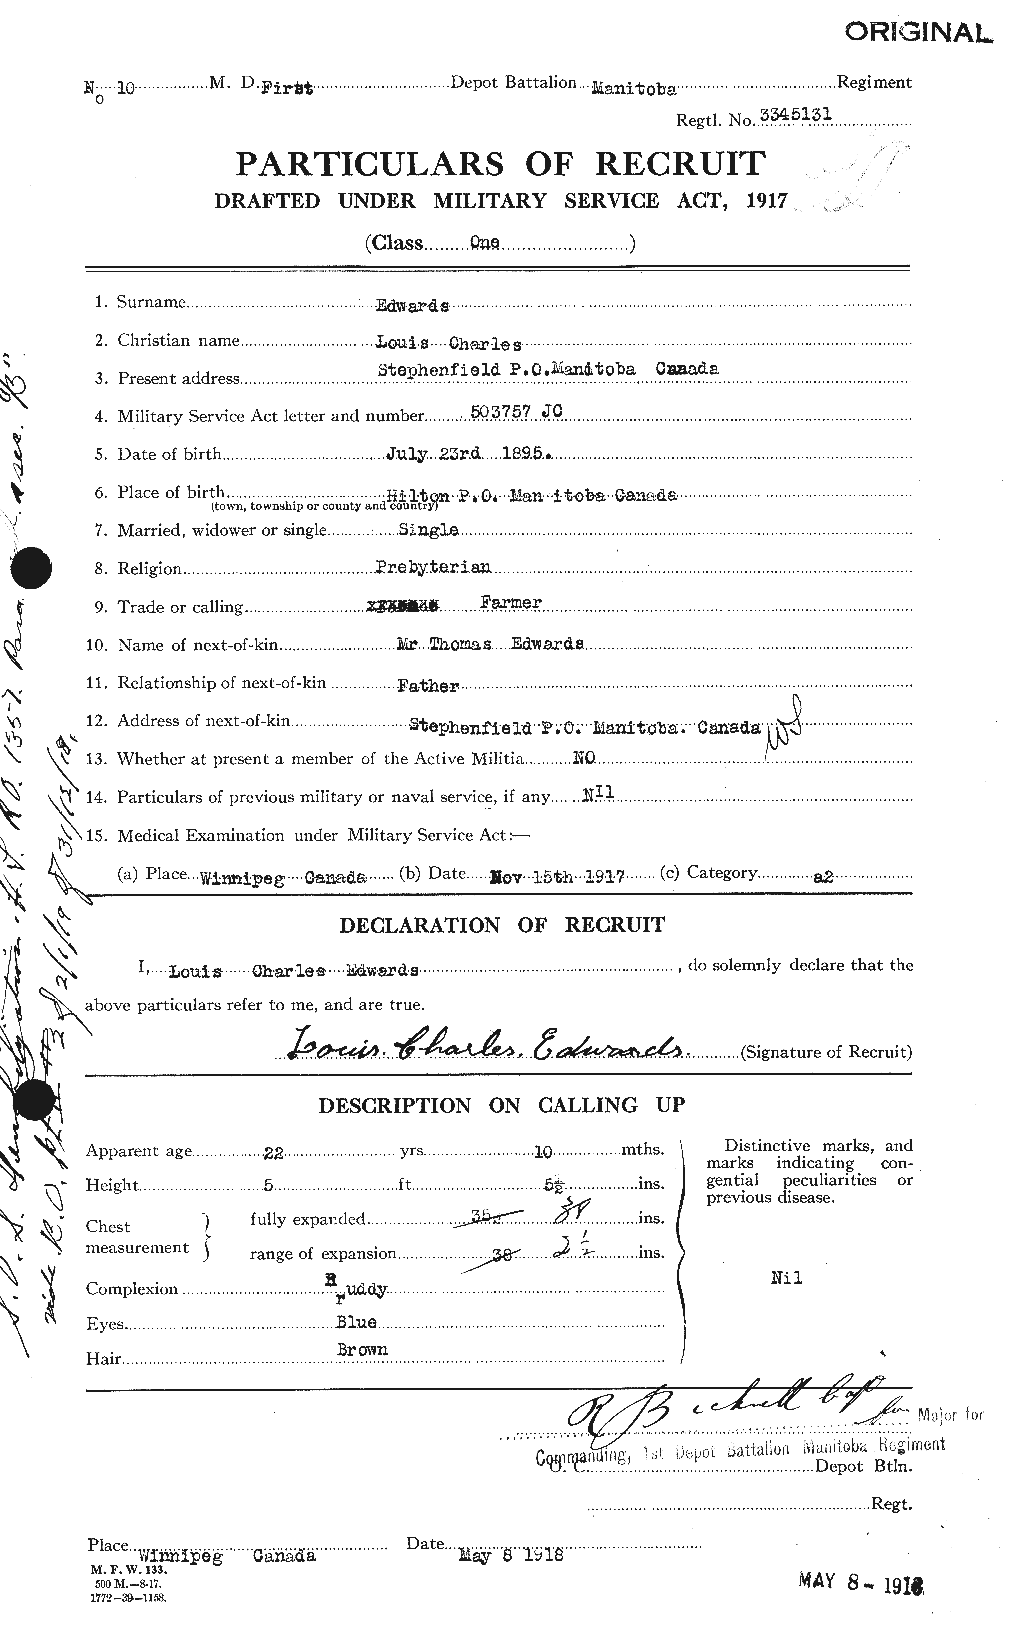 Personnel Records of the First World War - CEF 310206a